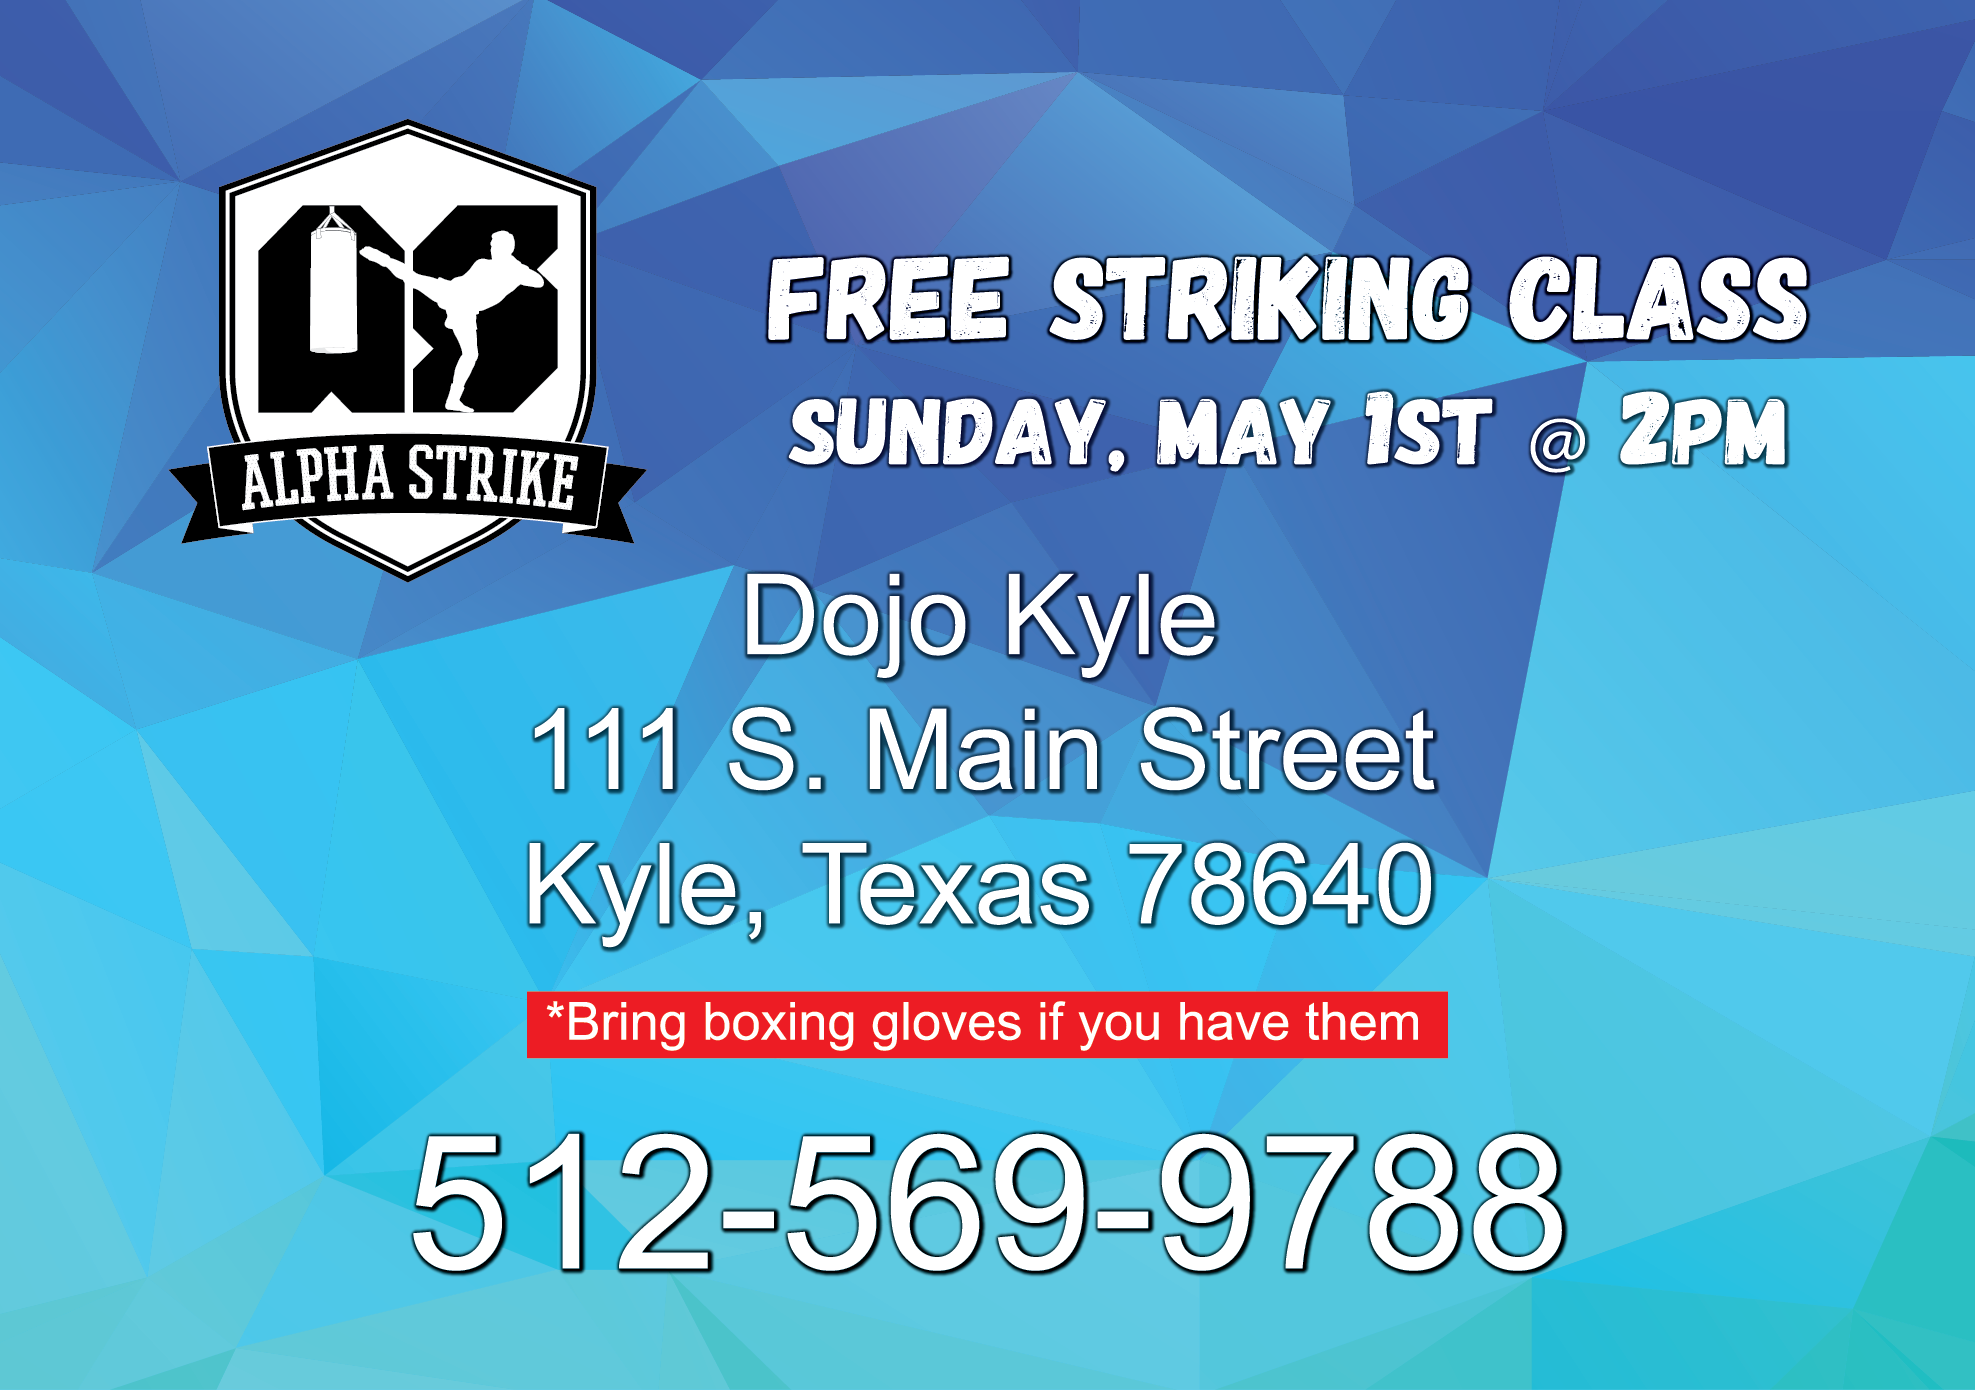 New Boxing/Striking Academy Starting Classes in Kyle